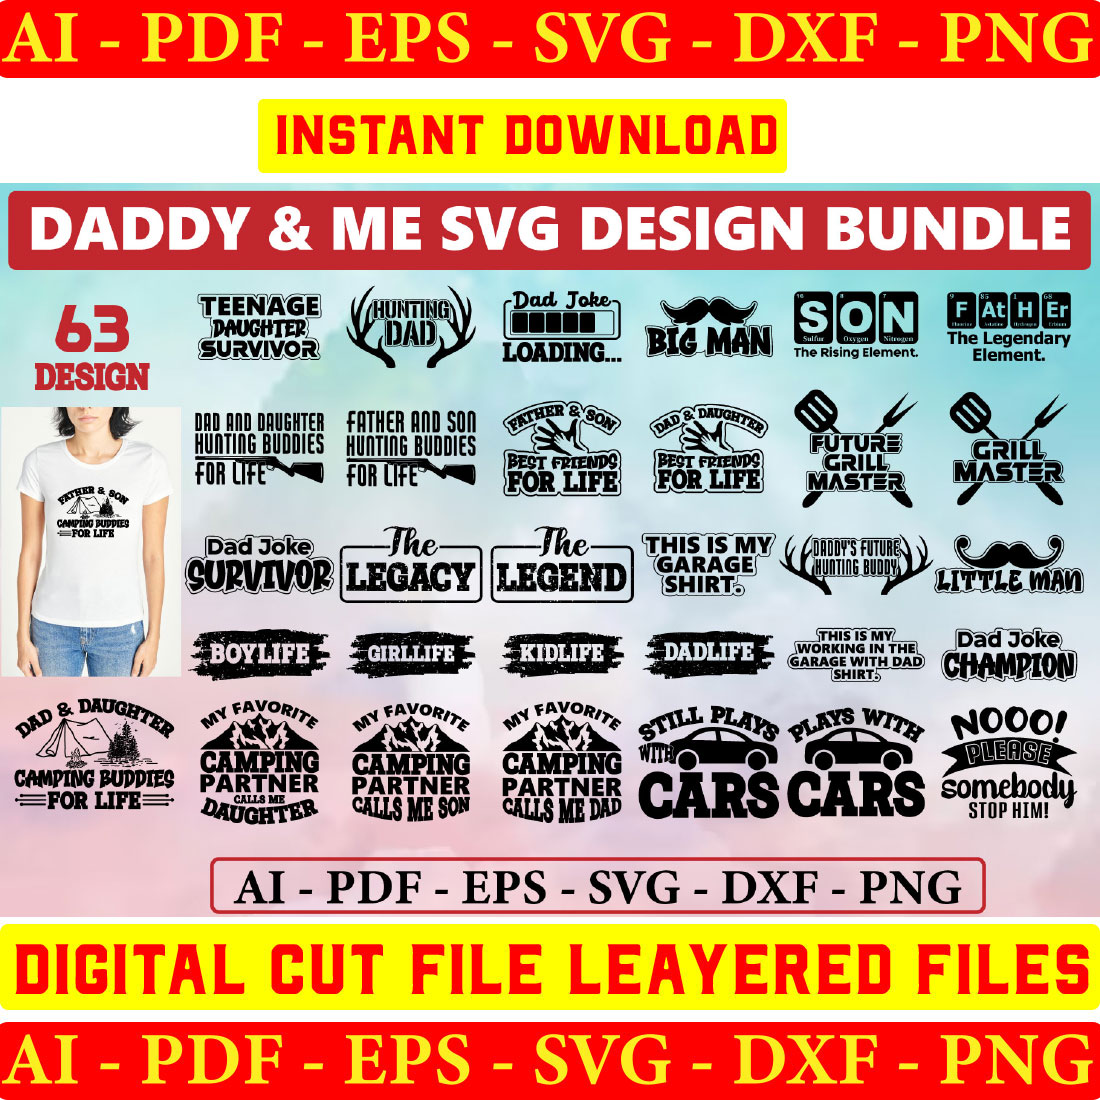 Daddy And Me SVG Bundle, Dad Kids Baby Son Daughter Girl Boy, Matching Outfit, Family Shirts, Digital Cut File, Fathers Day Gift, Dad Life cover image.